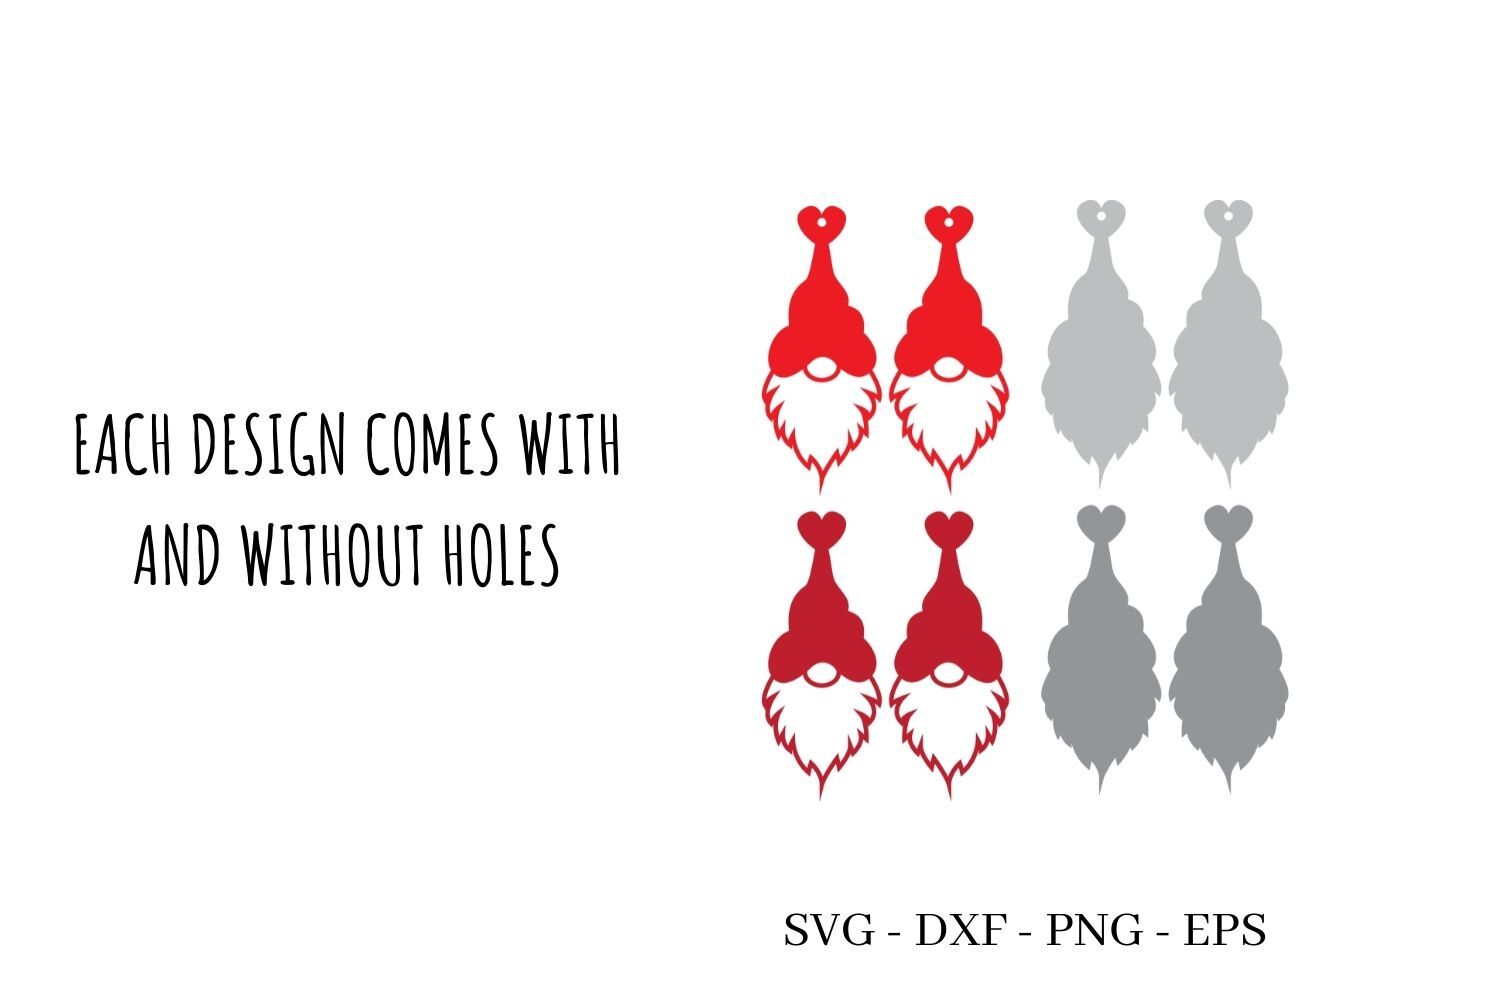 Valentines Gnome Earrings Bundle Graphic by Taita Digital